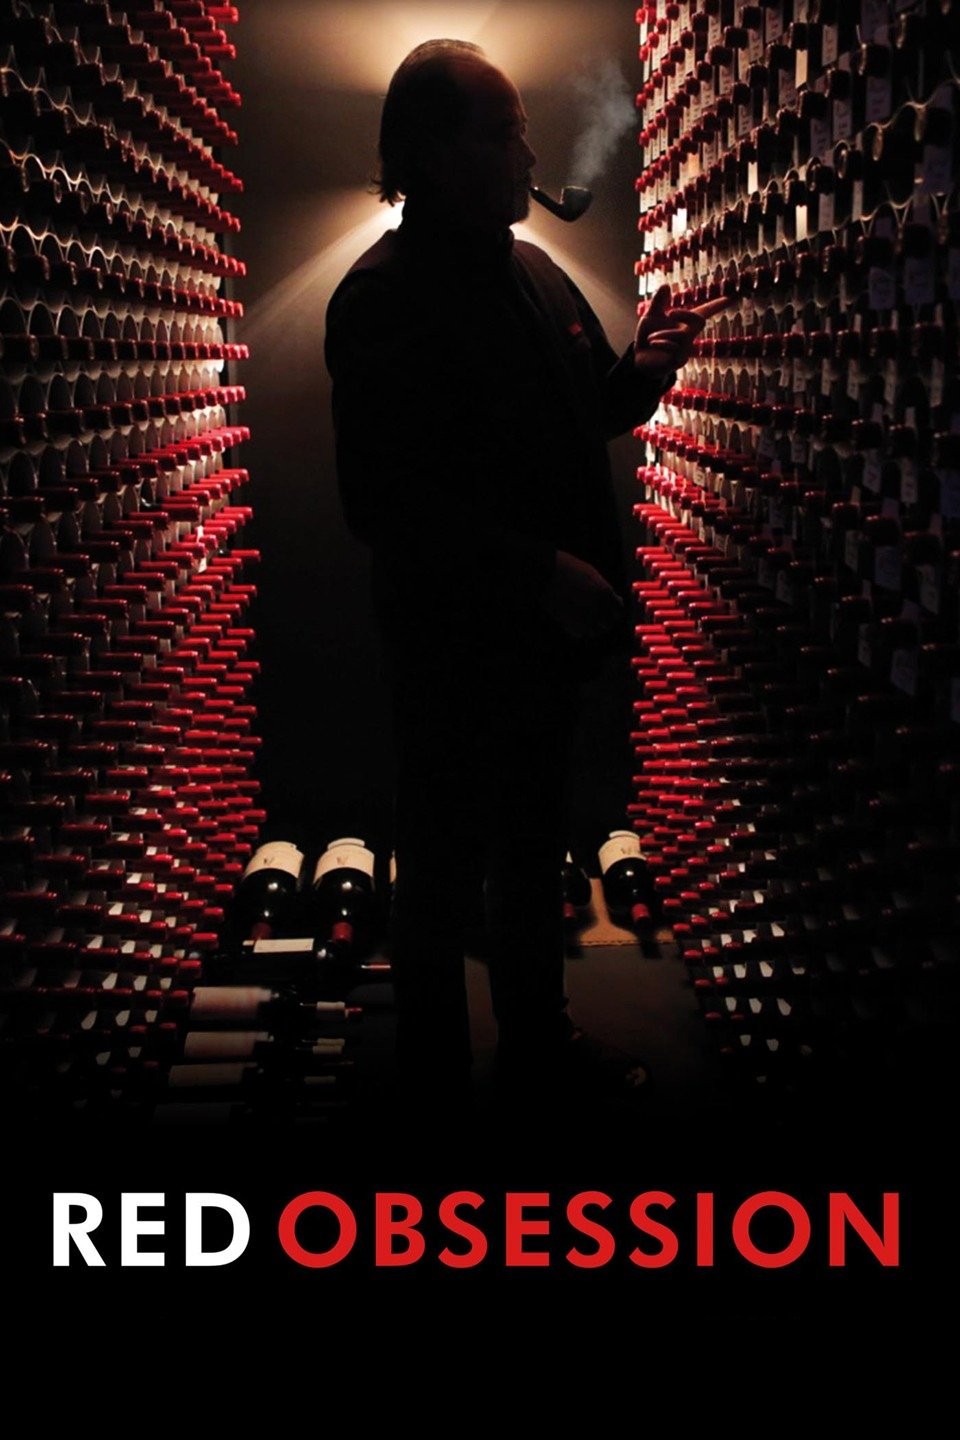 RED OBSESSION Trailer  New Release 2013 